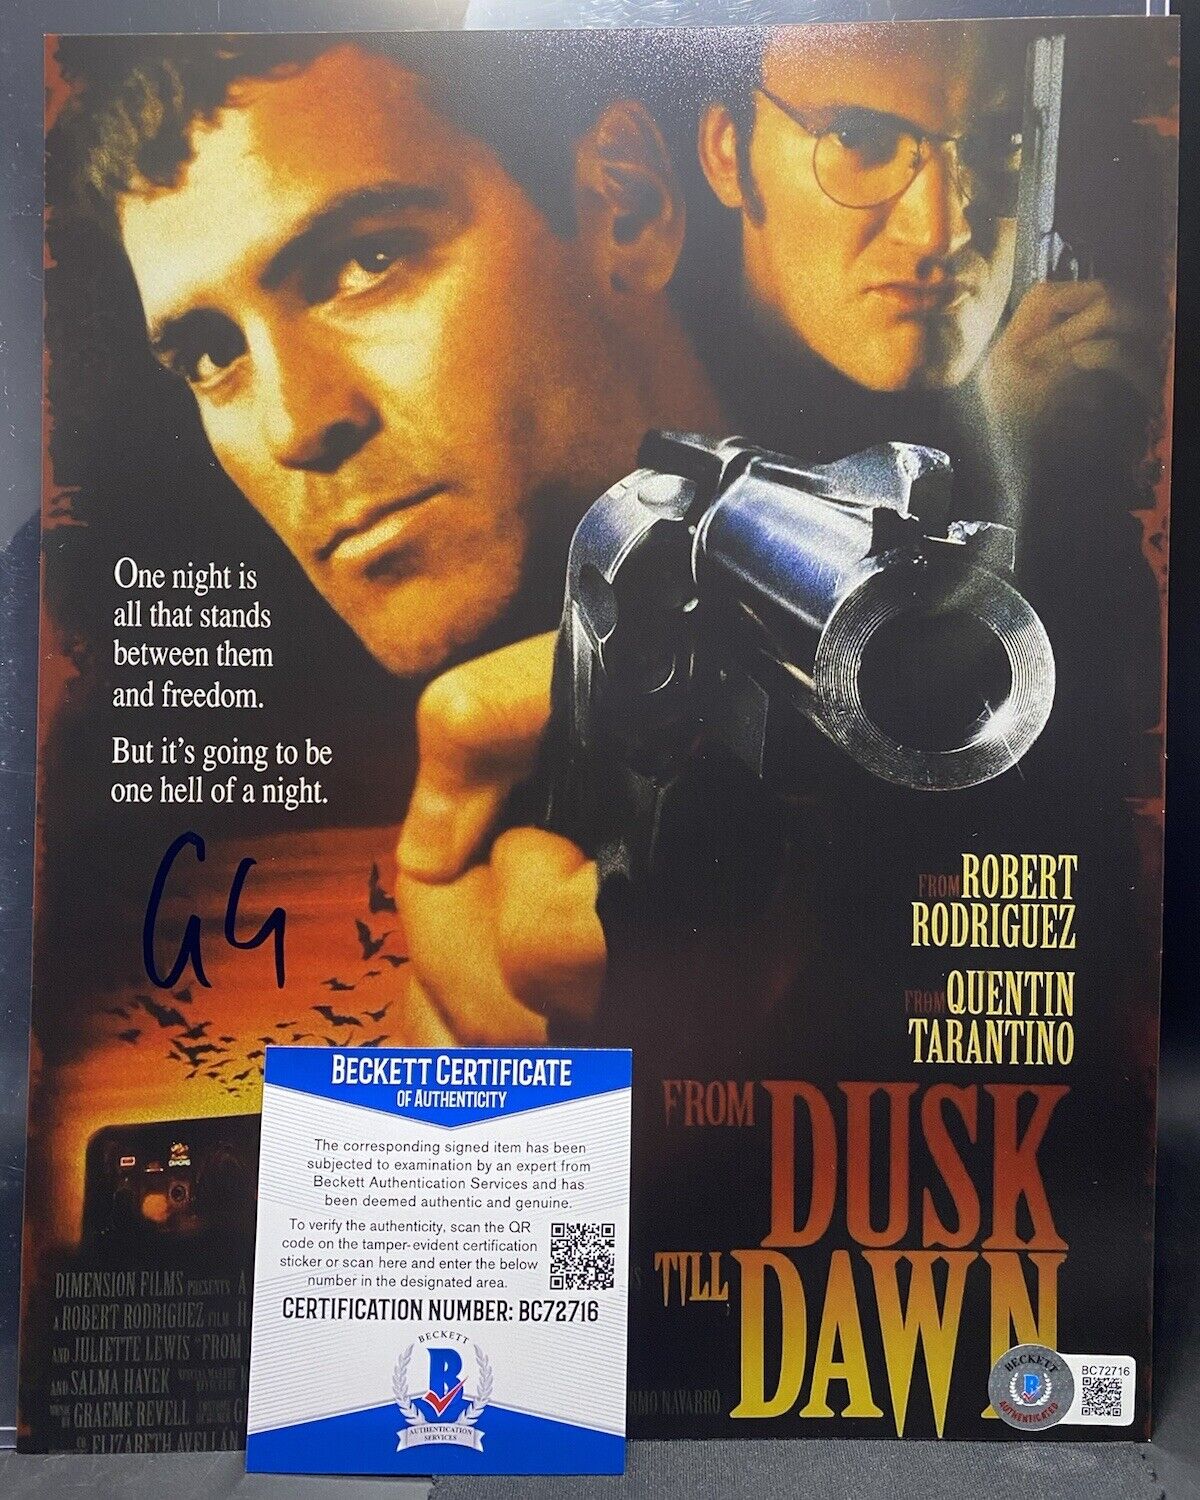 GEORGE CLOONEY SIGNED ‘FROM DUSK TILL DAWN’ 8x10, BECKETT CERTIFIED AUTOGRAPH